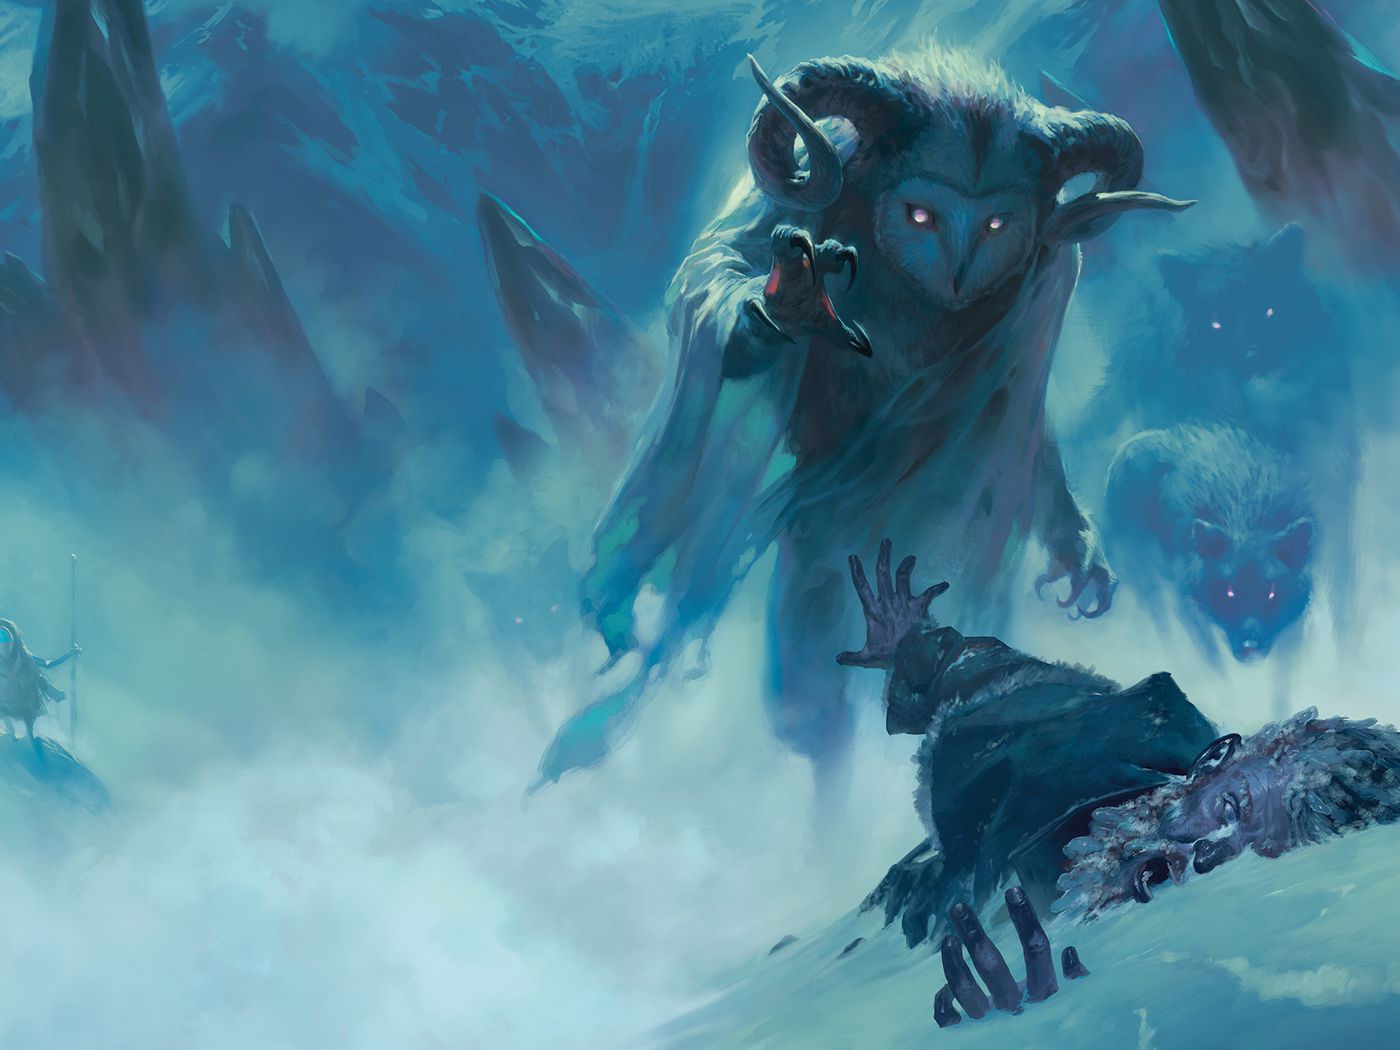 D&D - Icewind Dale - Rime of the Frostmaiden - Loaded Dice Barry Vale of Glamorgan CF64 3HD